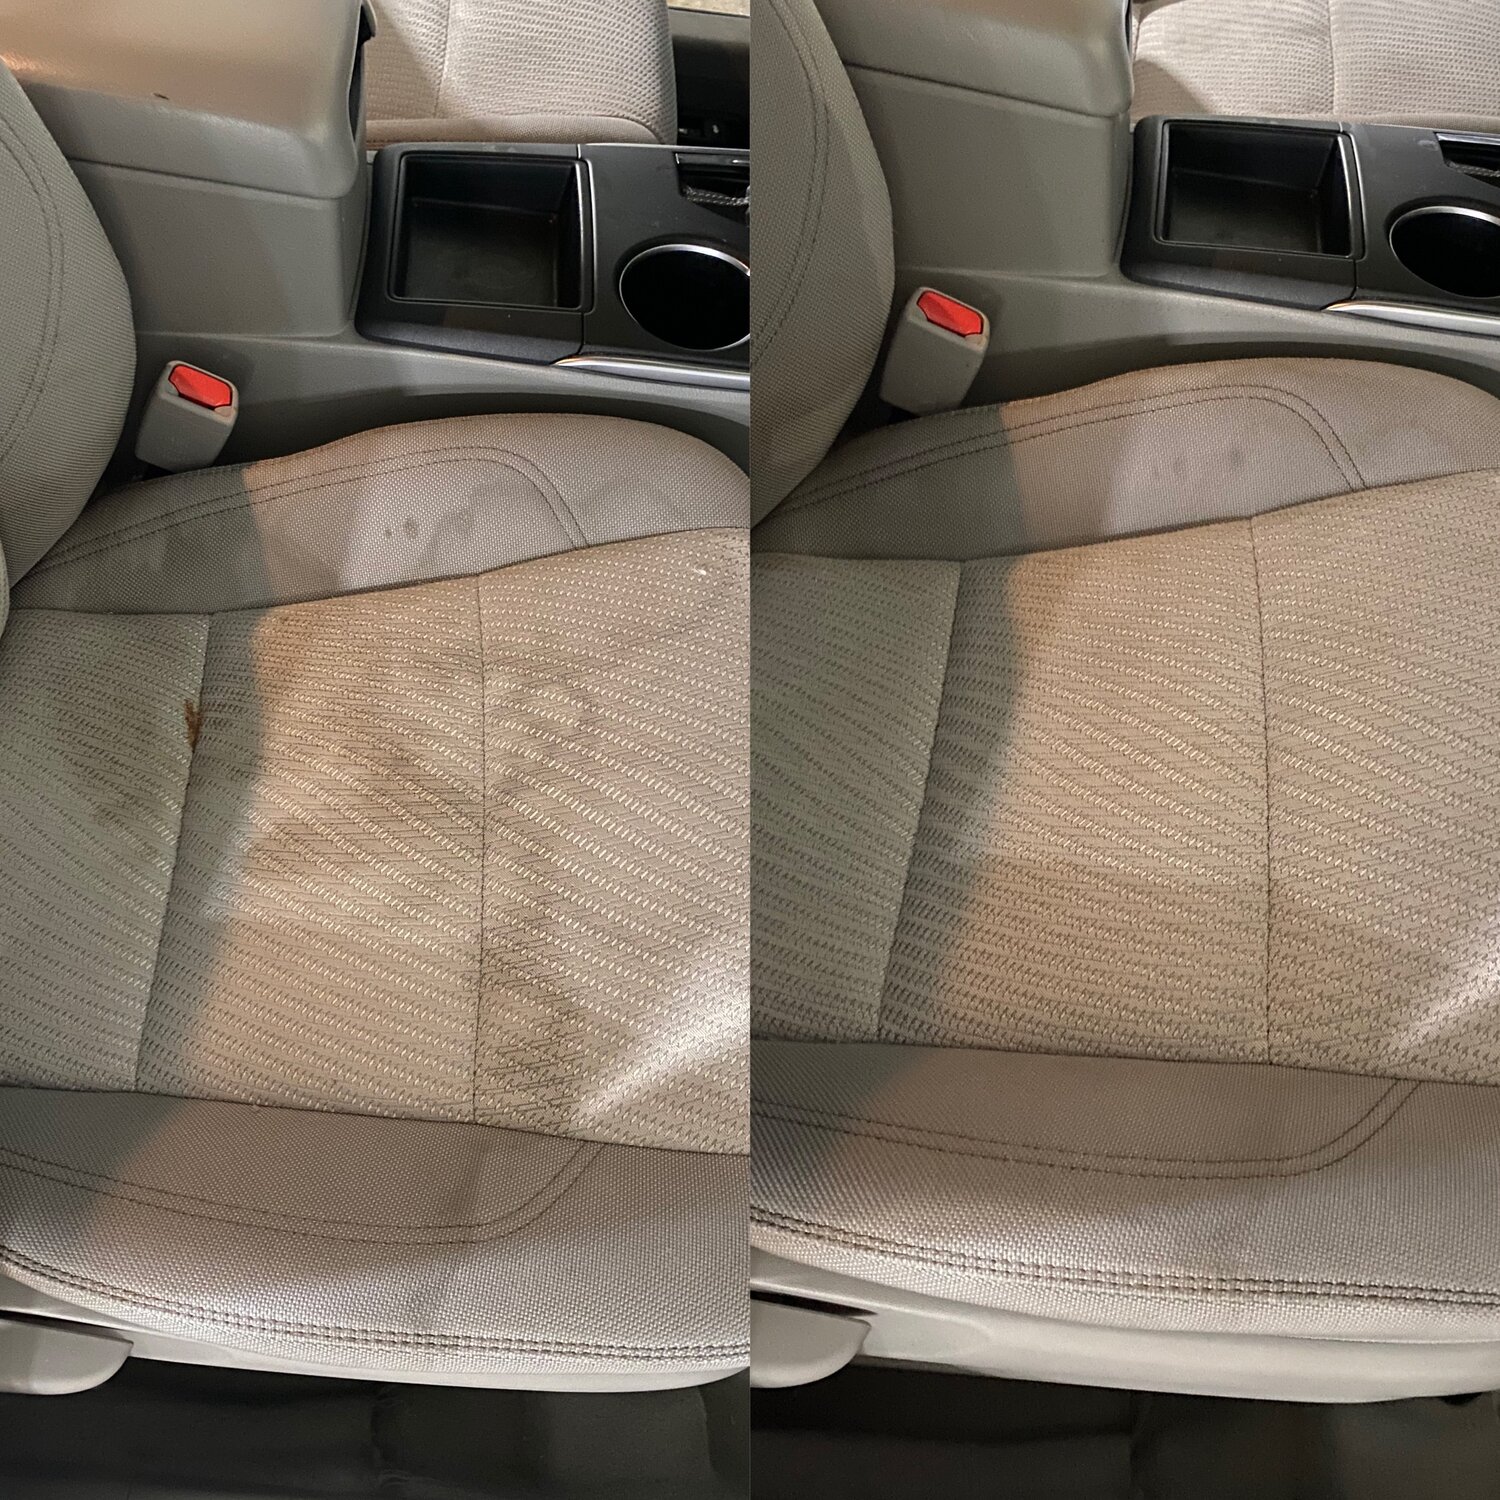 Deep Cleaning Car Seats: Effective Techniques for Stain Removal